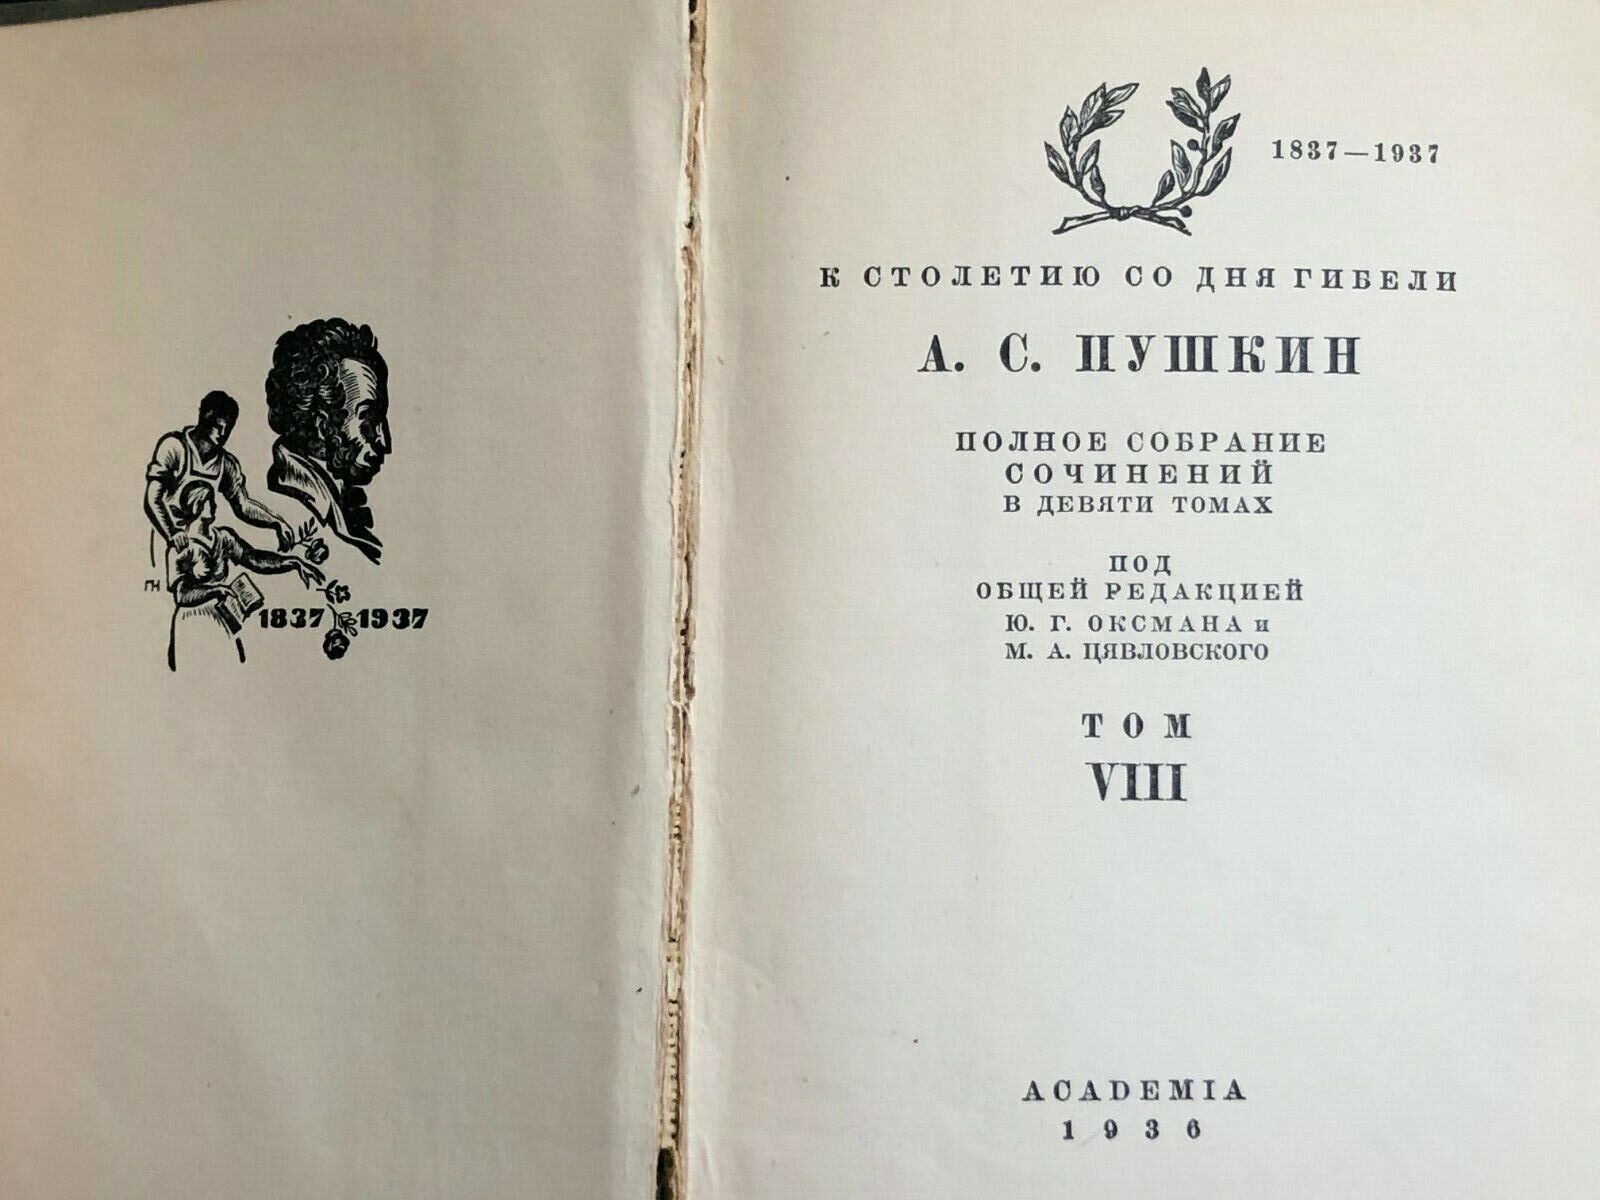 A. PUSHKIN 1935-1937 EDITION COMPLETE WORKS IN 9 MINI VOLUMES WITH COMMENTARIES Без бренда - фотография #10